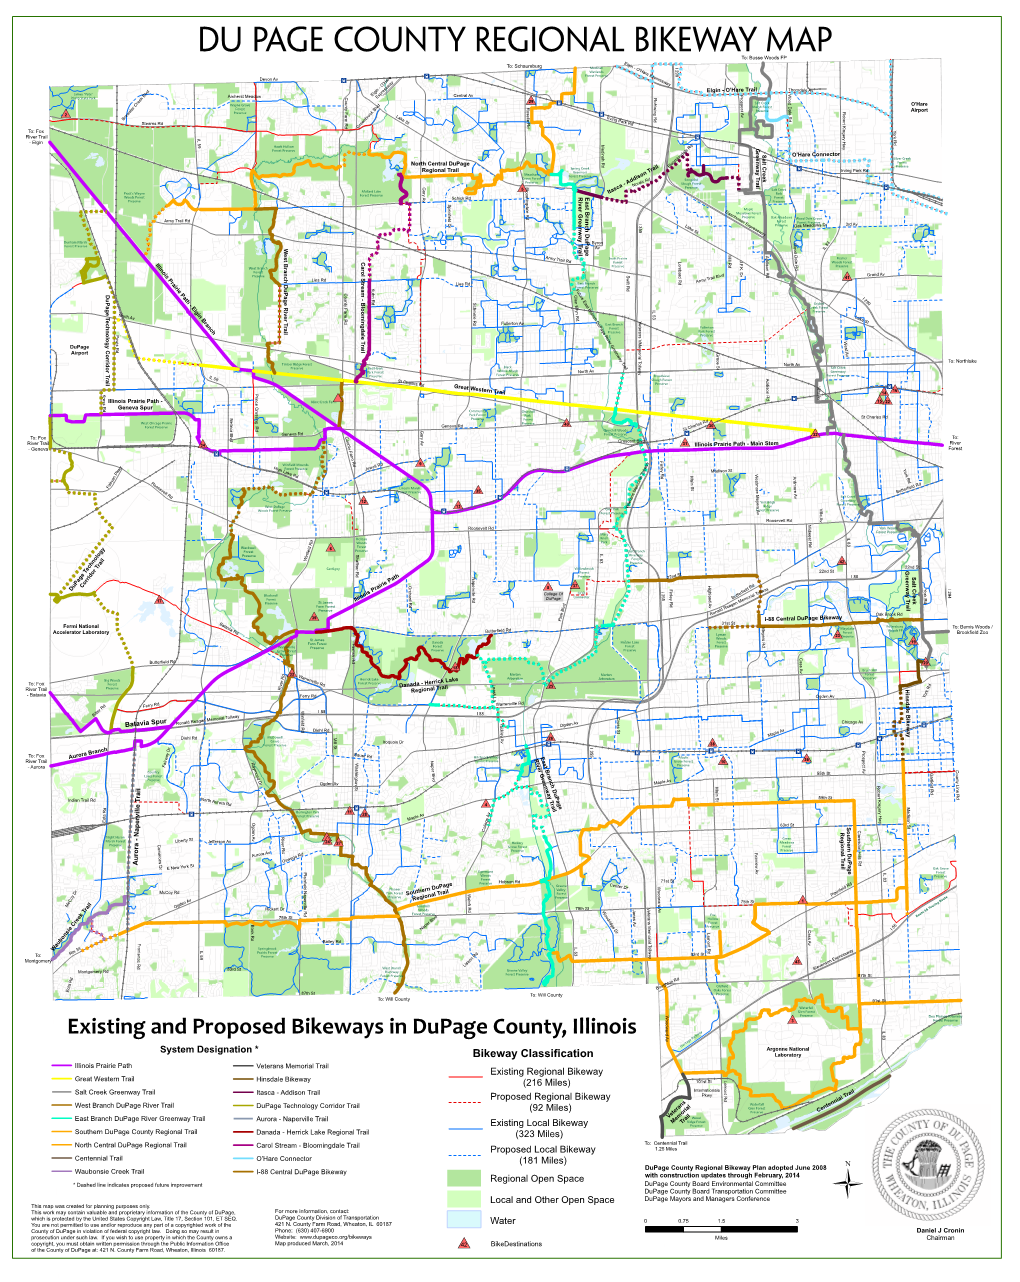 Existing and Proposed Bikeways in Dupage County, Illinois